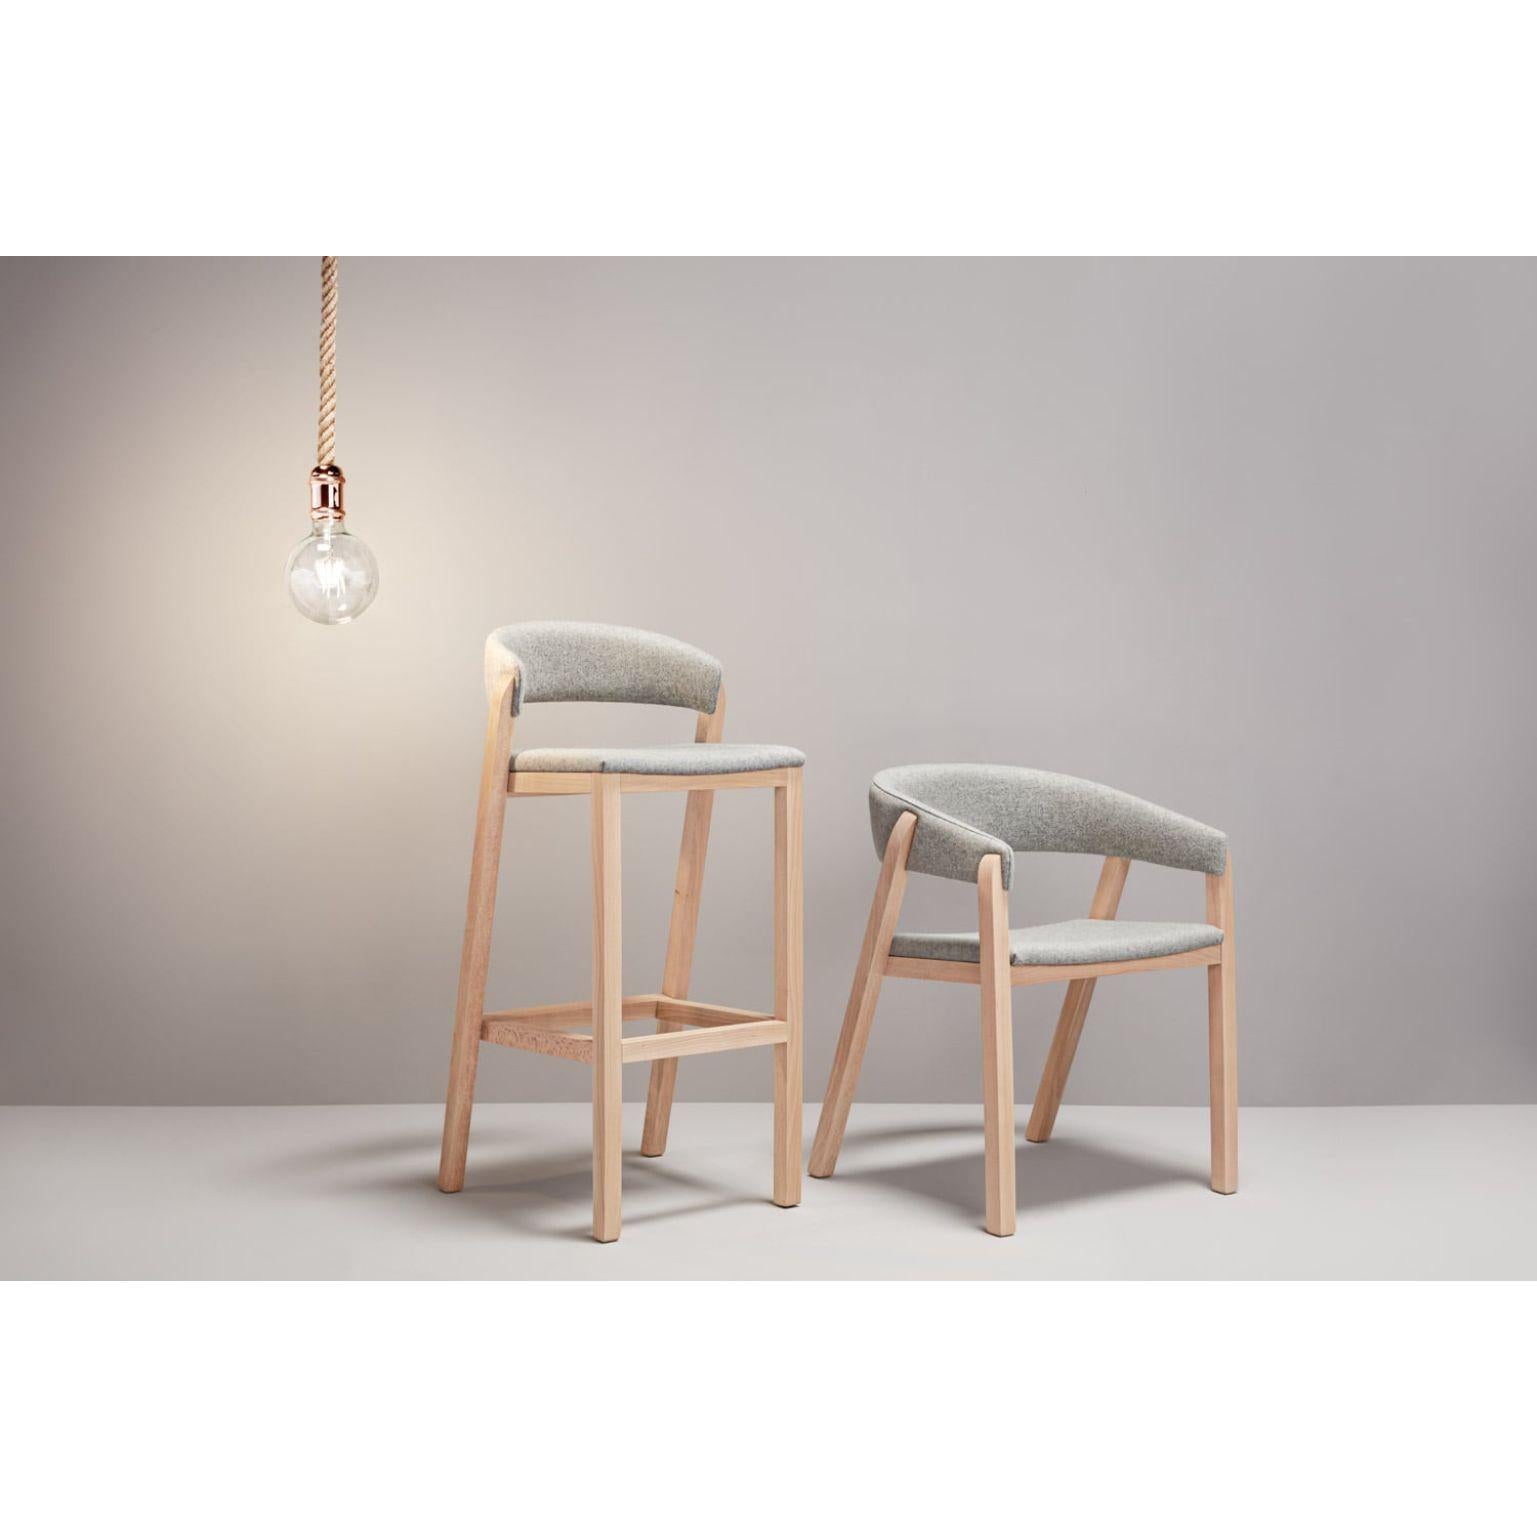 A set of gray Oslo stool & chair by Pepe Albargues
Dimensions: Stool W48, D50, H101, Seat78, Chair W59, D50, H75, Seat 46
Materials: Beech wood structure
Foam CMHR (high resilience and flame retardant) for all our cushion filling systems

Also